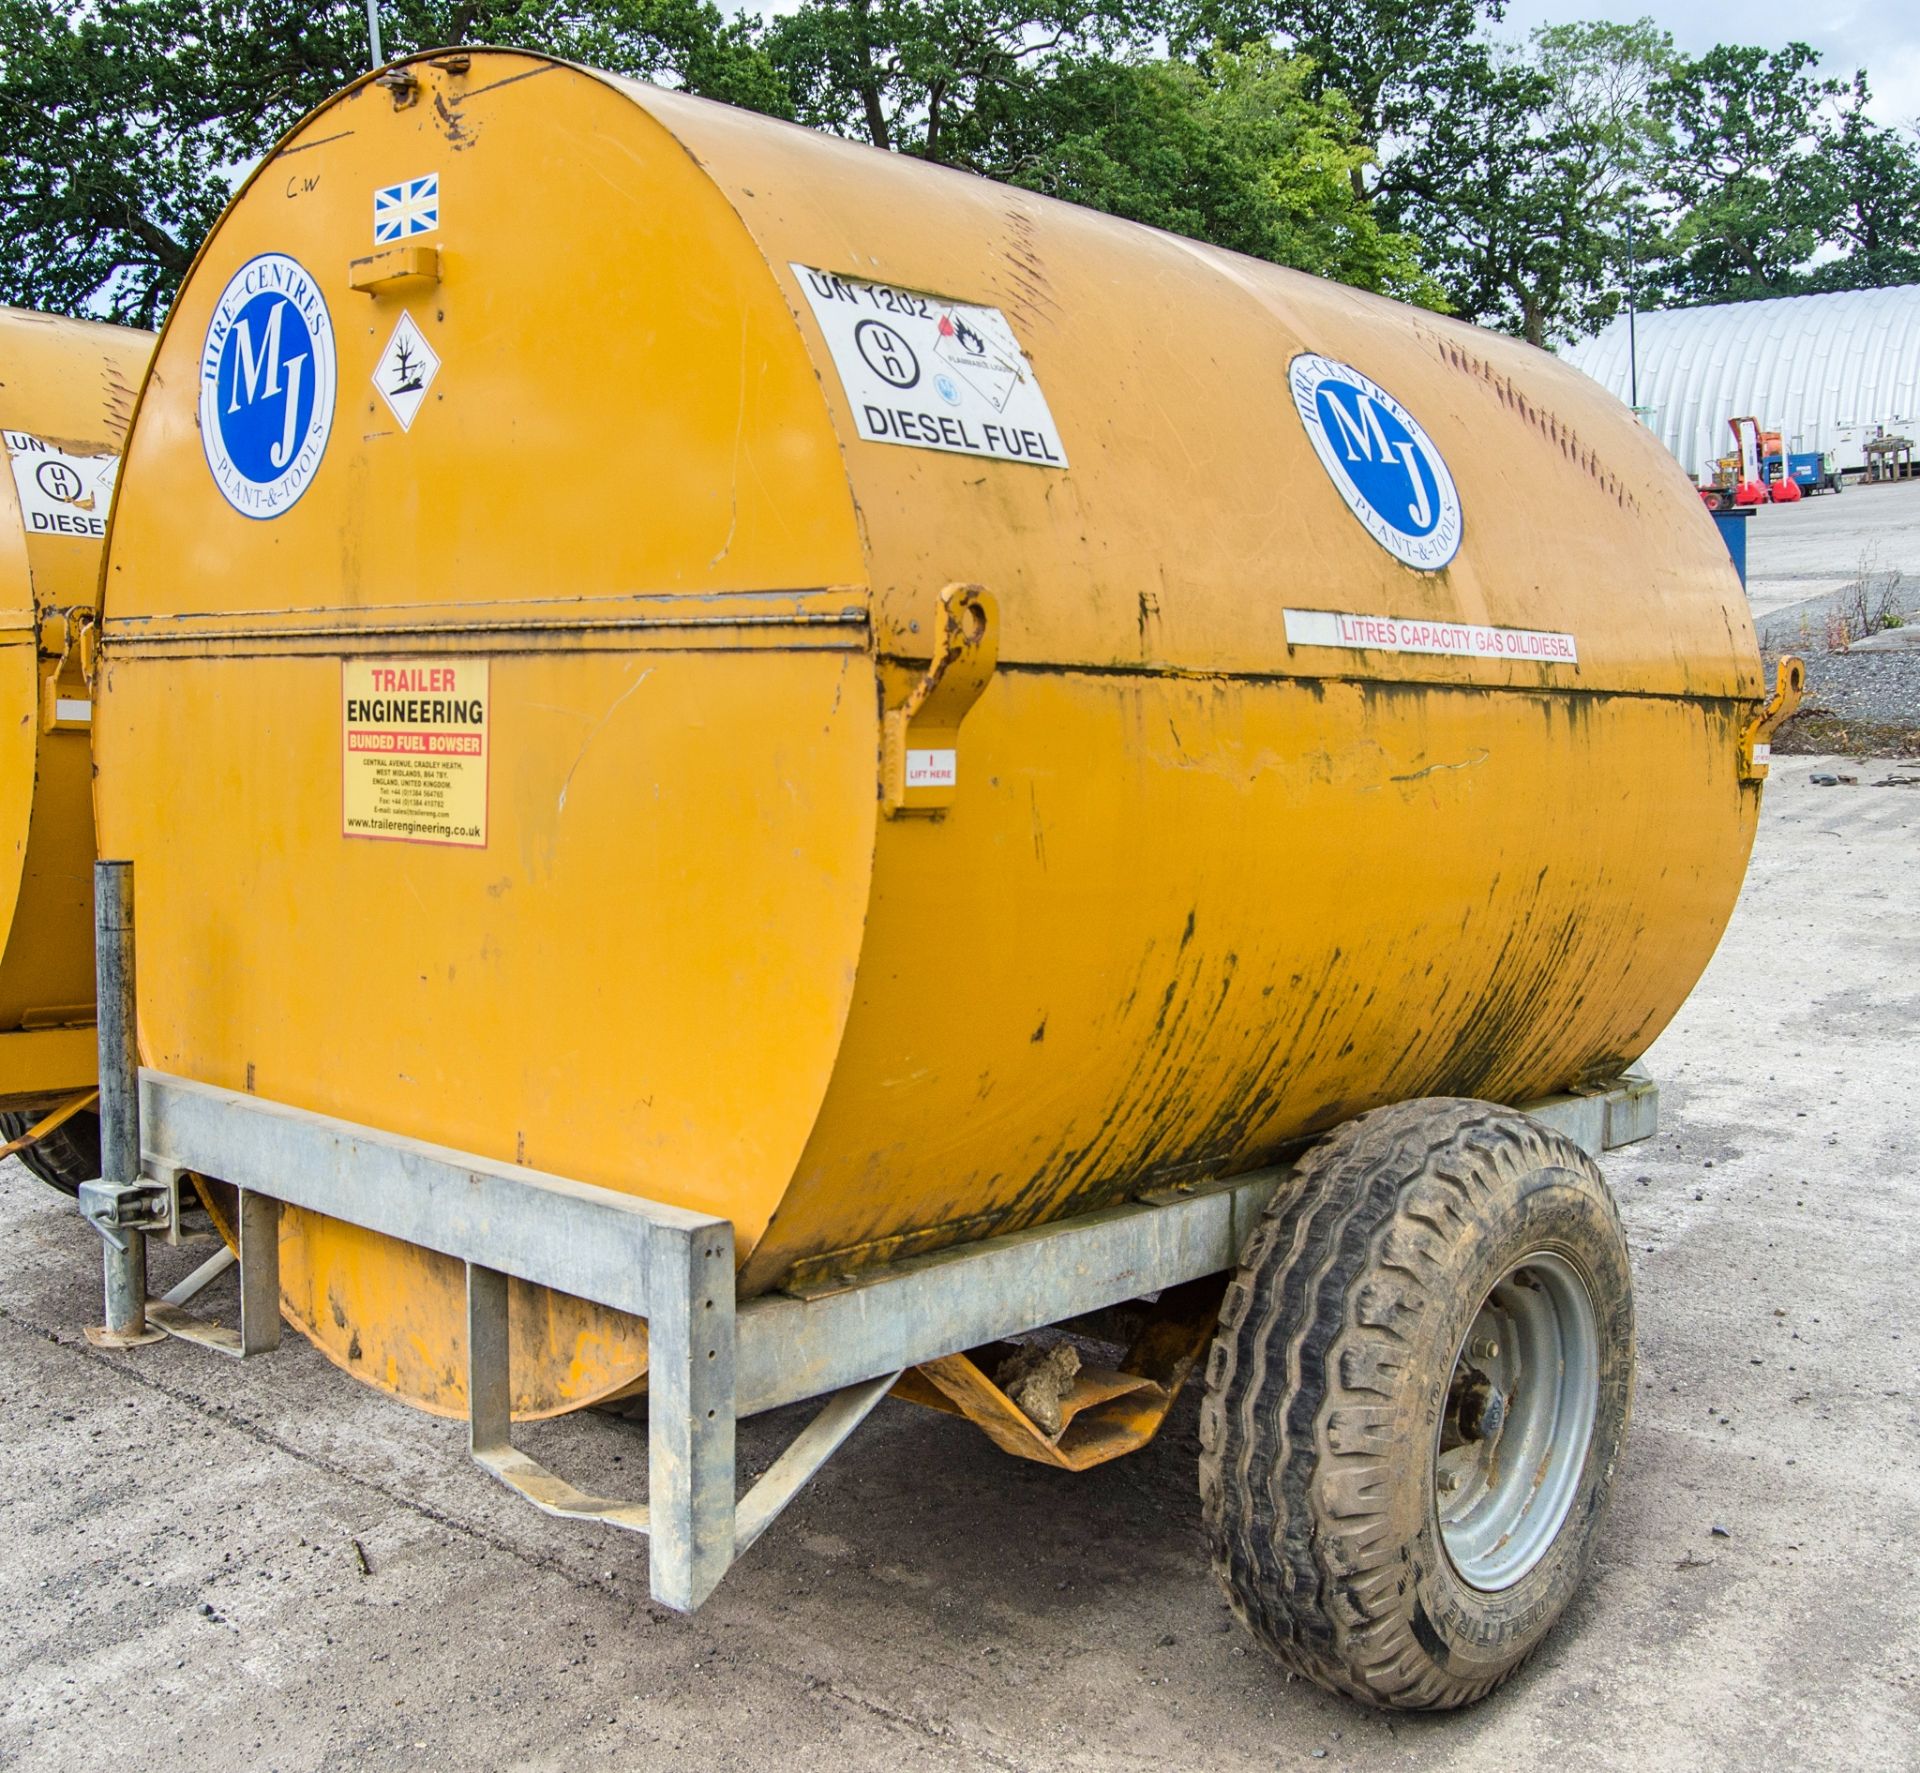 Trailer Engineering 2140 litre site tow bunded fuel bowser c/w manual pump, delivery hose & nozzle - Image 2 of 5